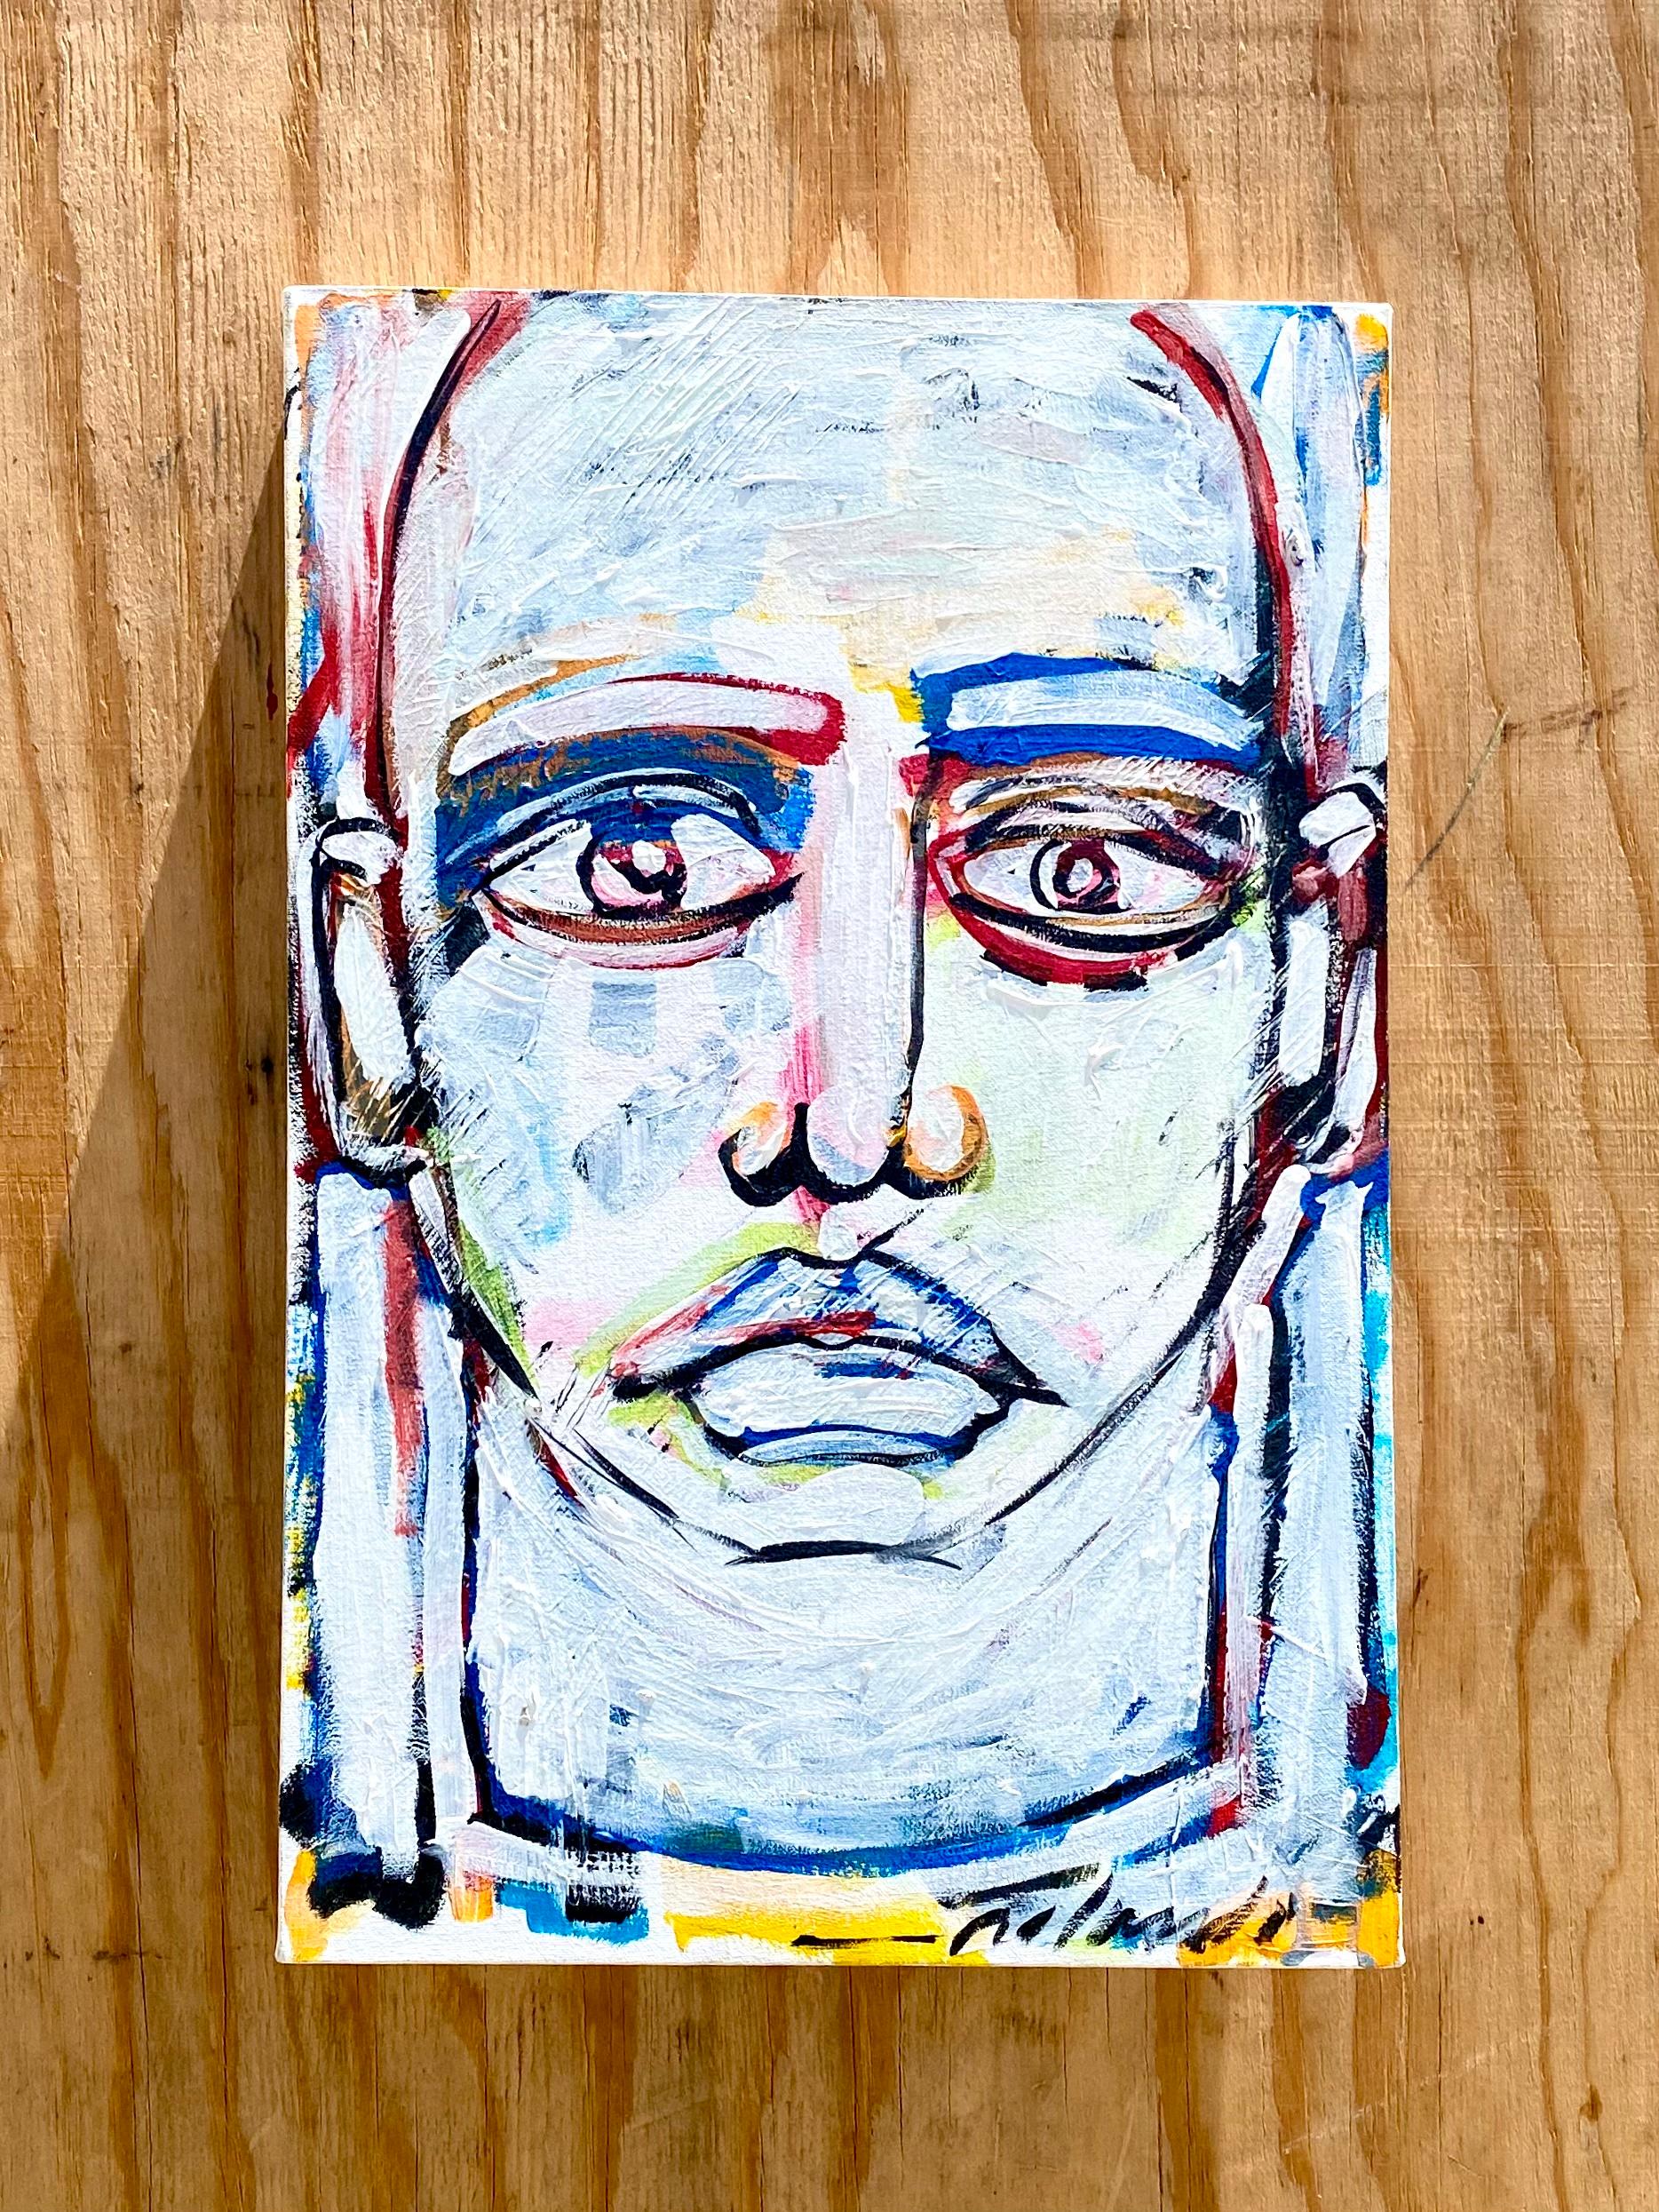 Fantastic contemporary abstract oil portrait. A beautiful and expressive face in brilliant colors. Signed by the artist Roland.